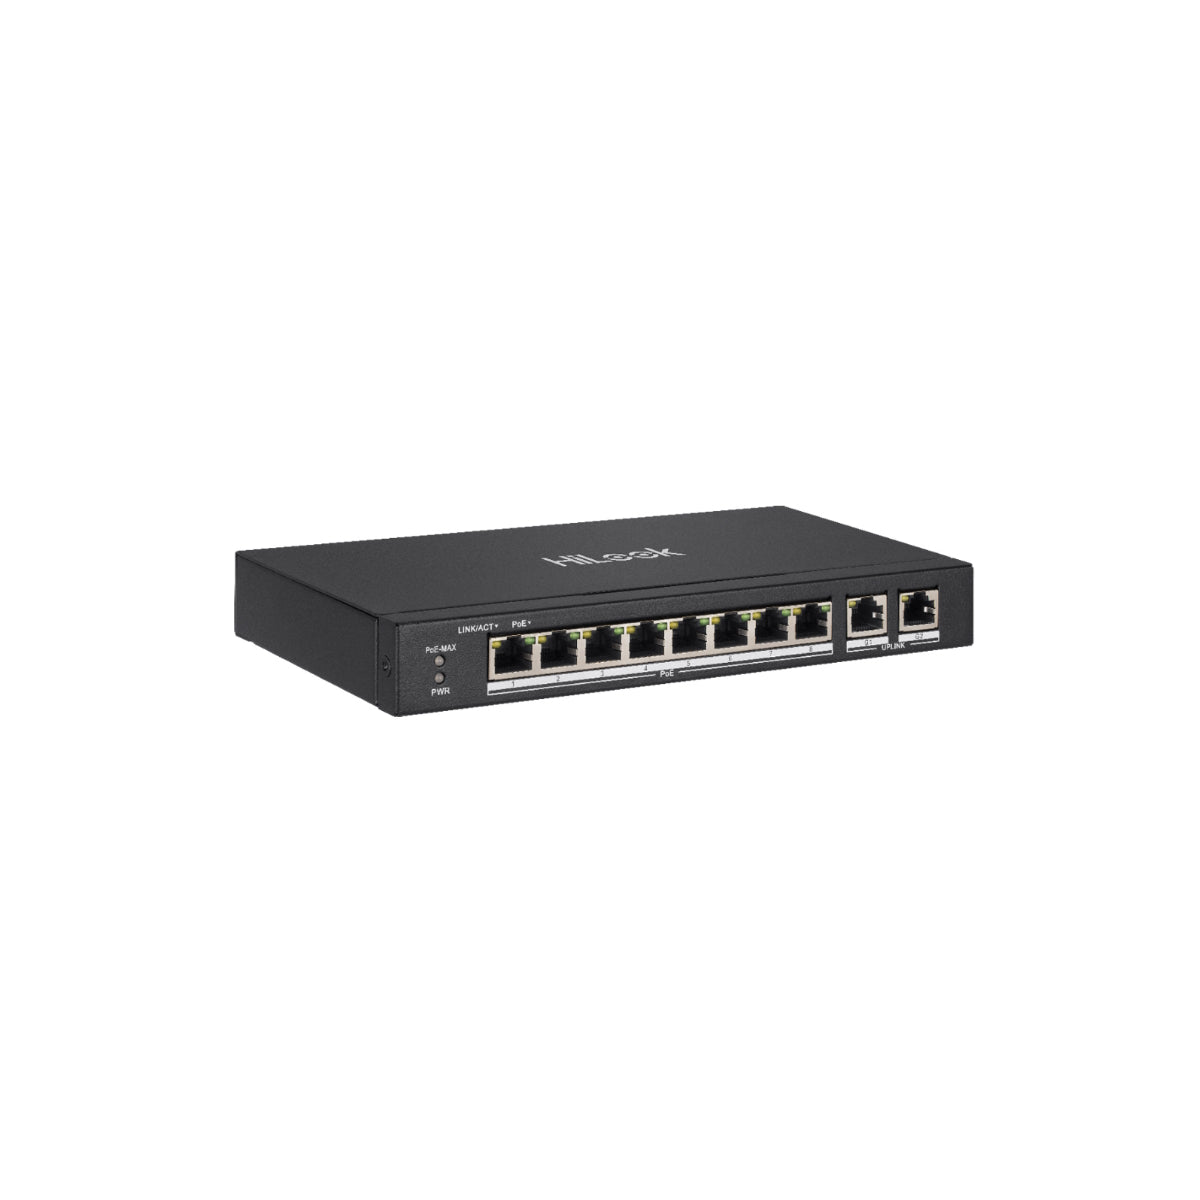 NS-0310P-60 HiLook 8 Port PoE+ Switch 100Mbps